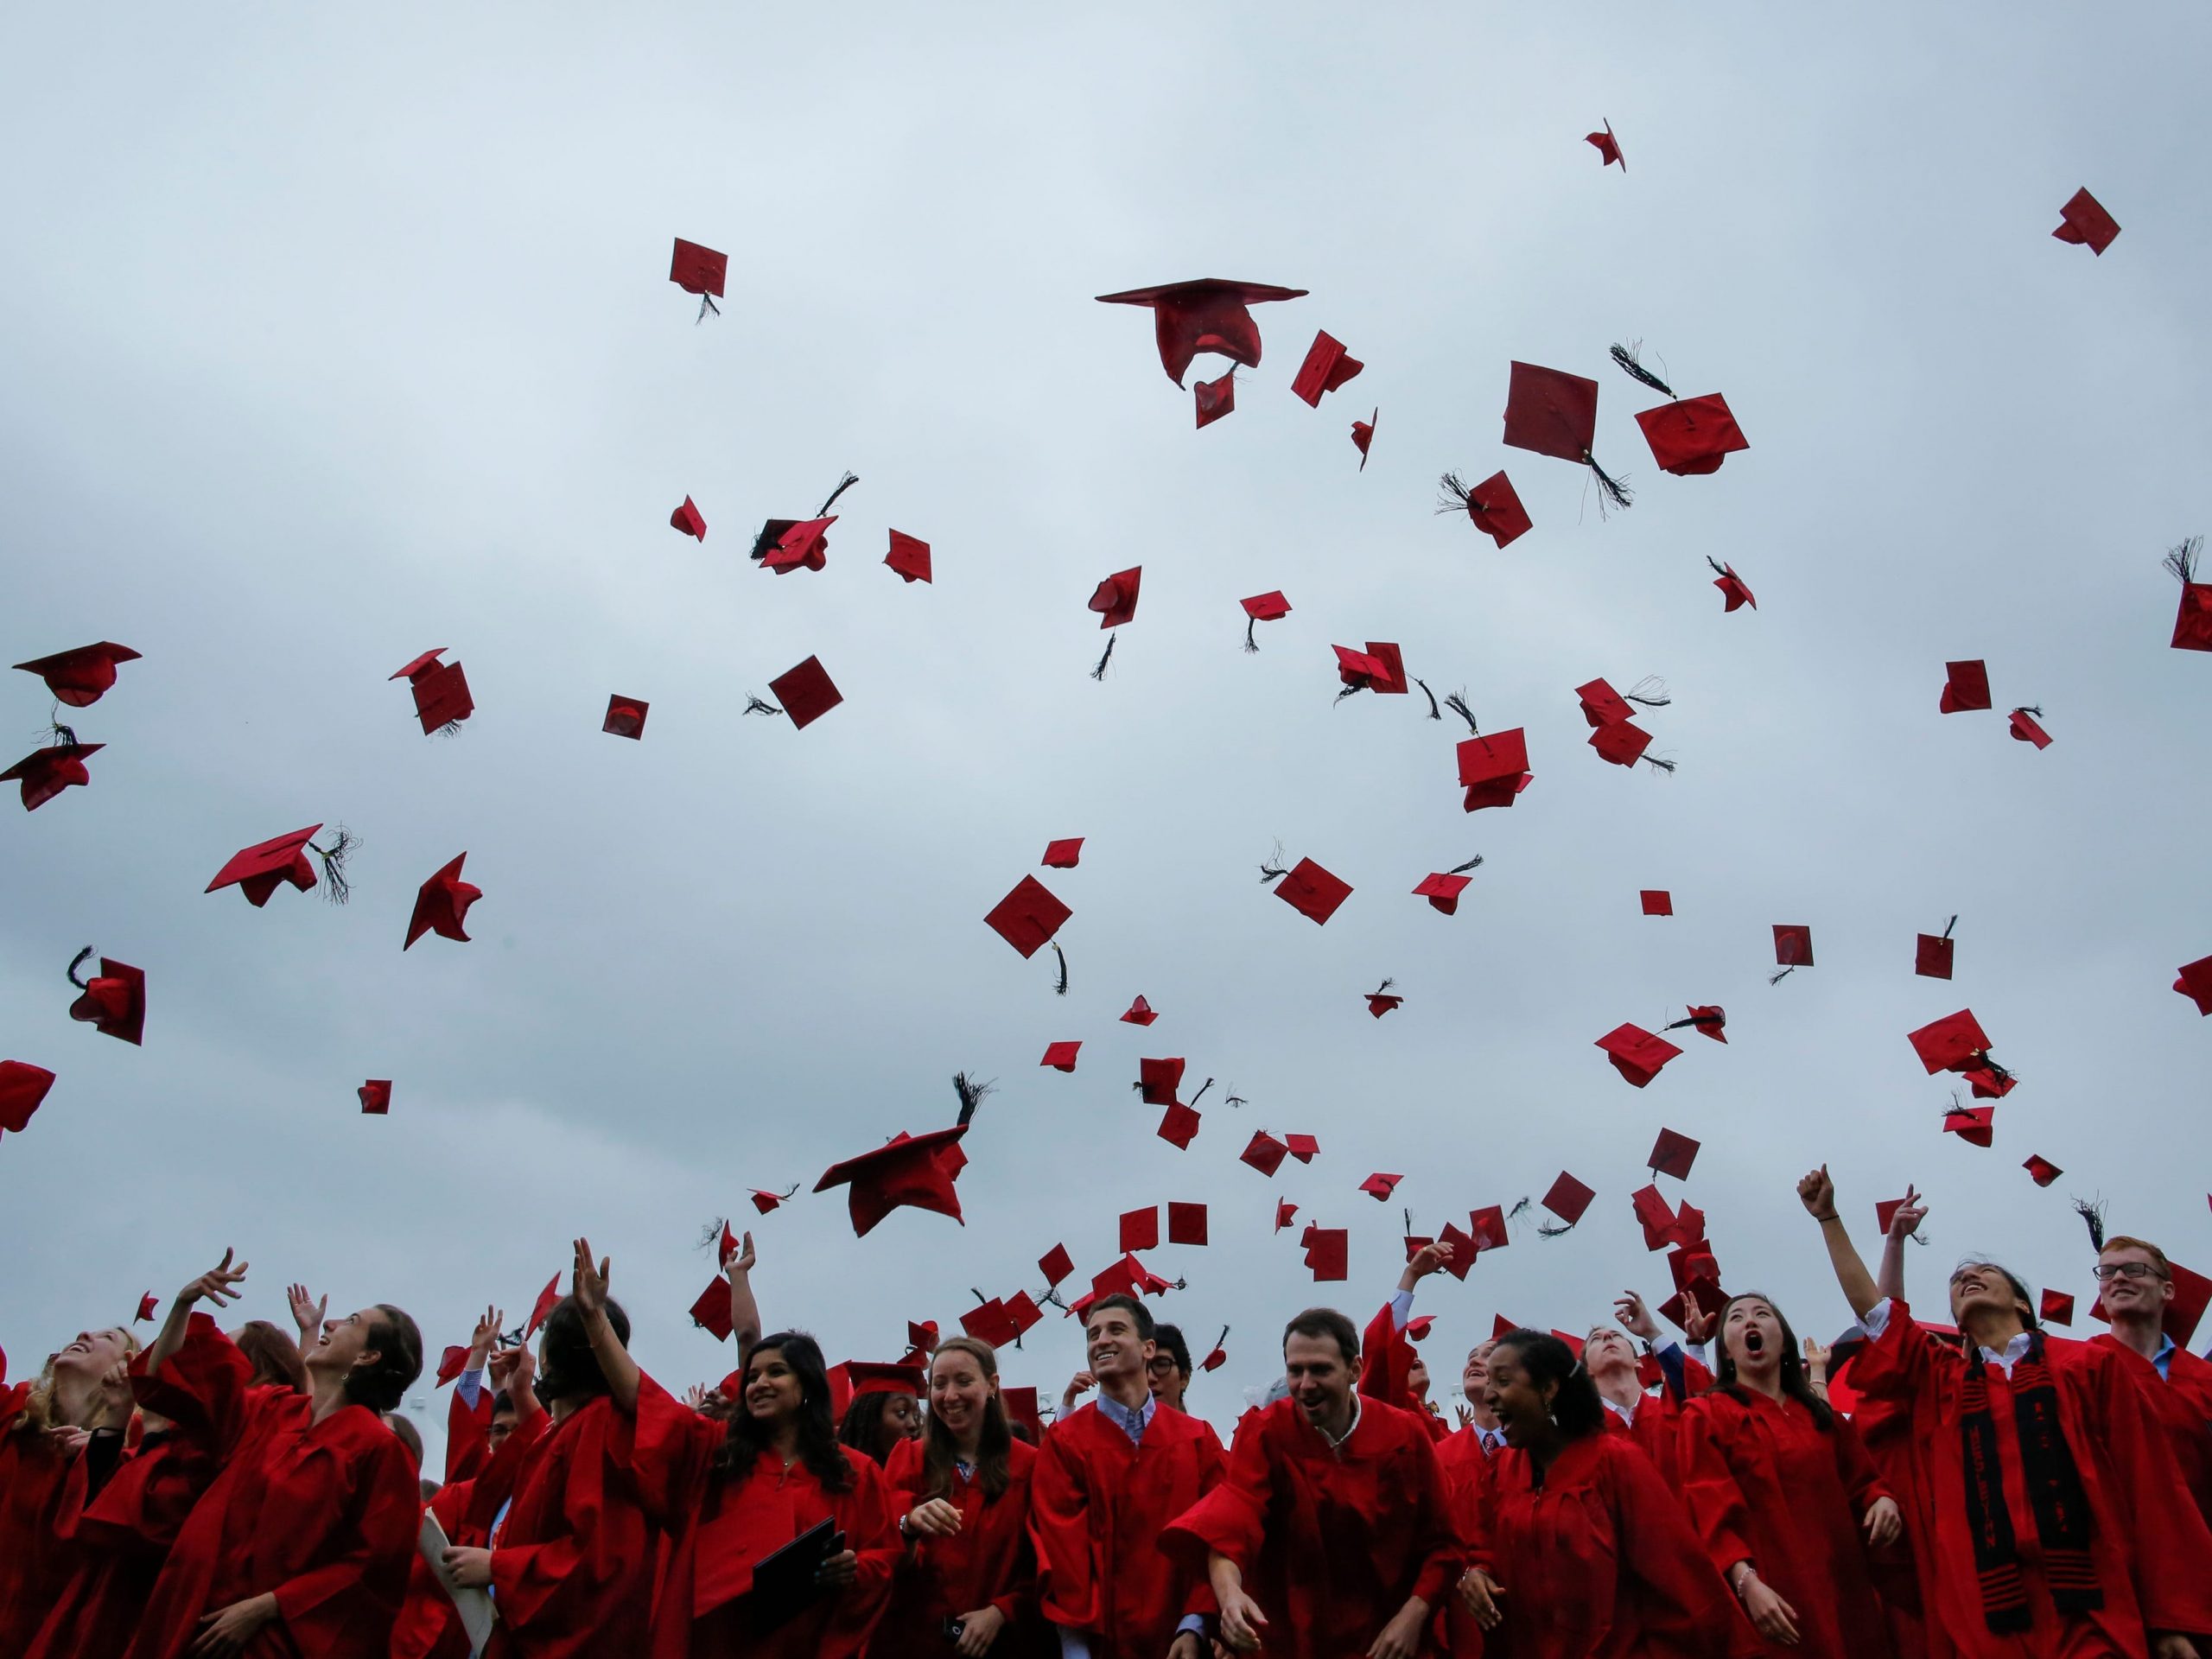 Hundreds of graduation hats are seen in the air above a crowd of students in graduation garb.